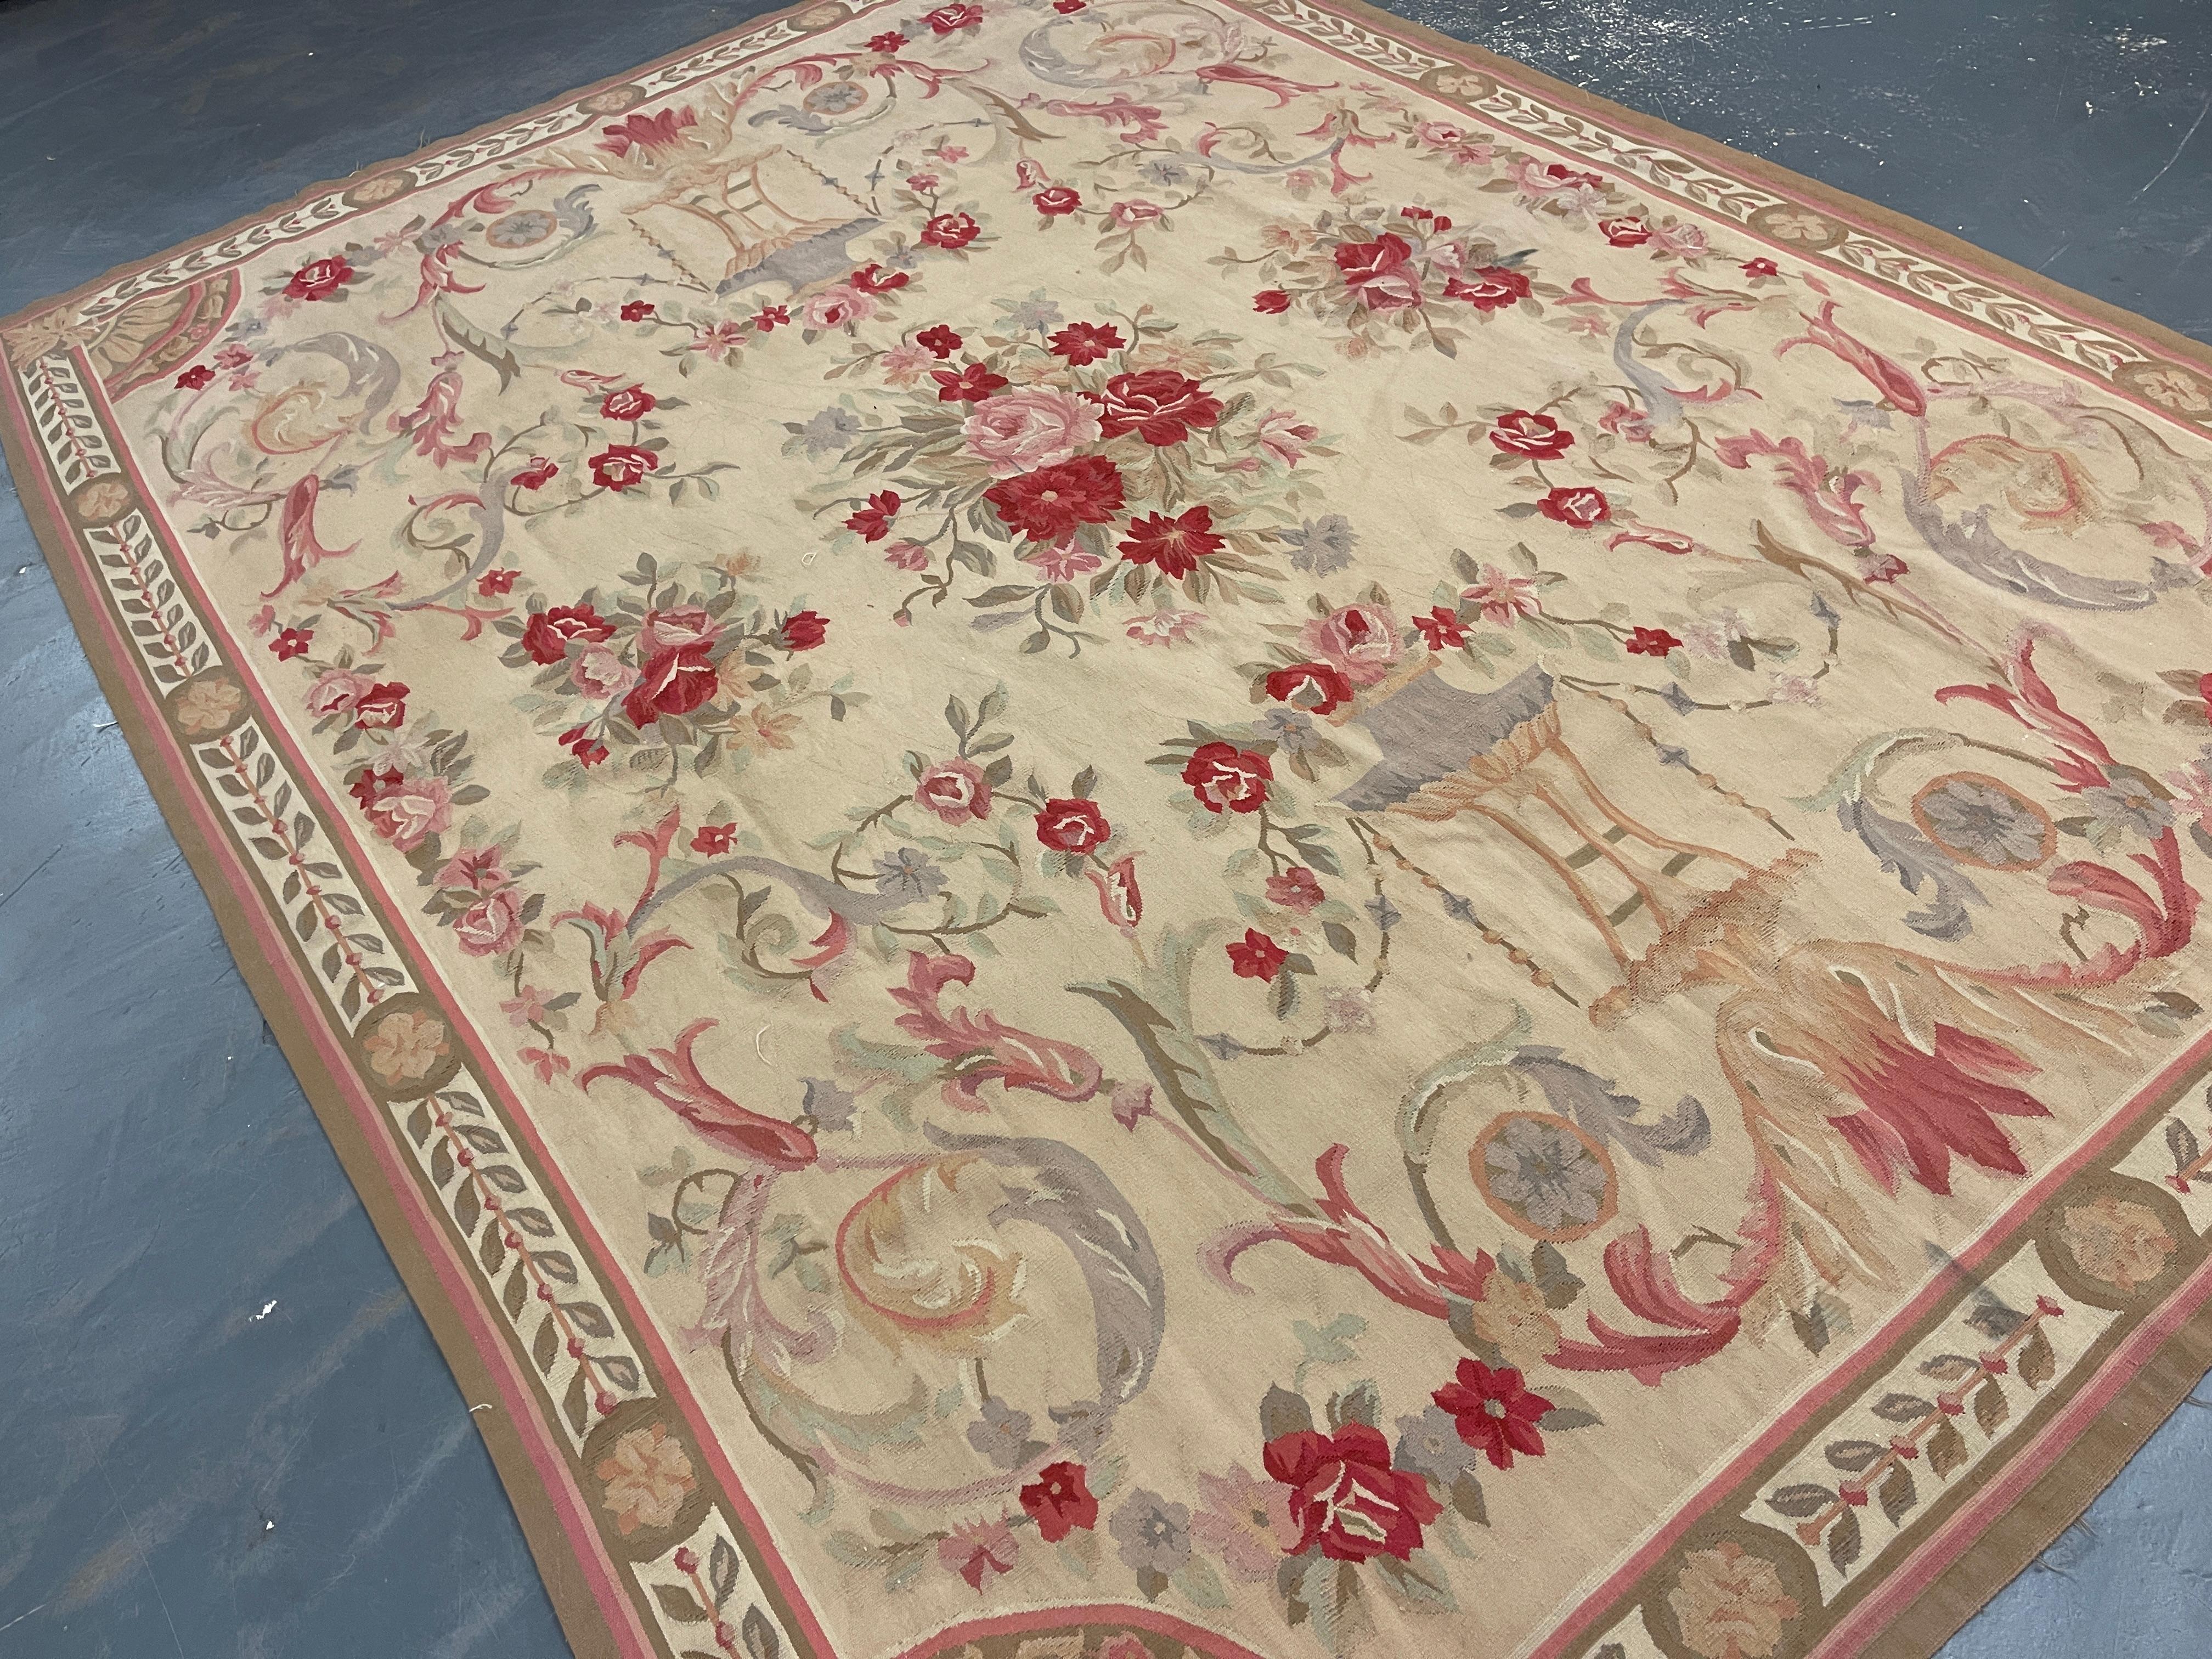 This fantastic area rug has been handwoven with a beautiful symmetrical pink floral design on an ivory blue background with cream green and ivory accents. This elegant piece's colour and design make it the perfect accent rug.
This rug style is best